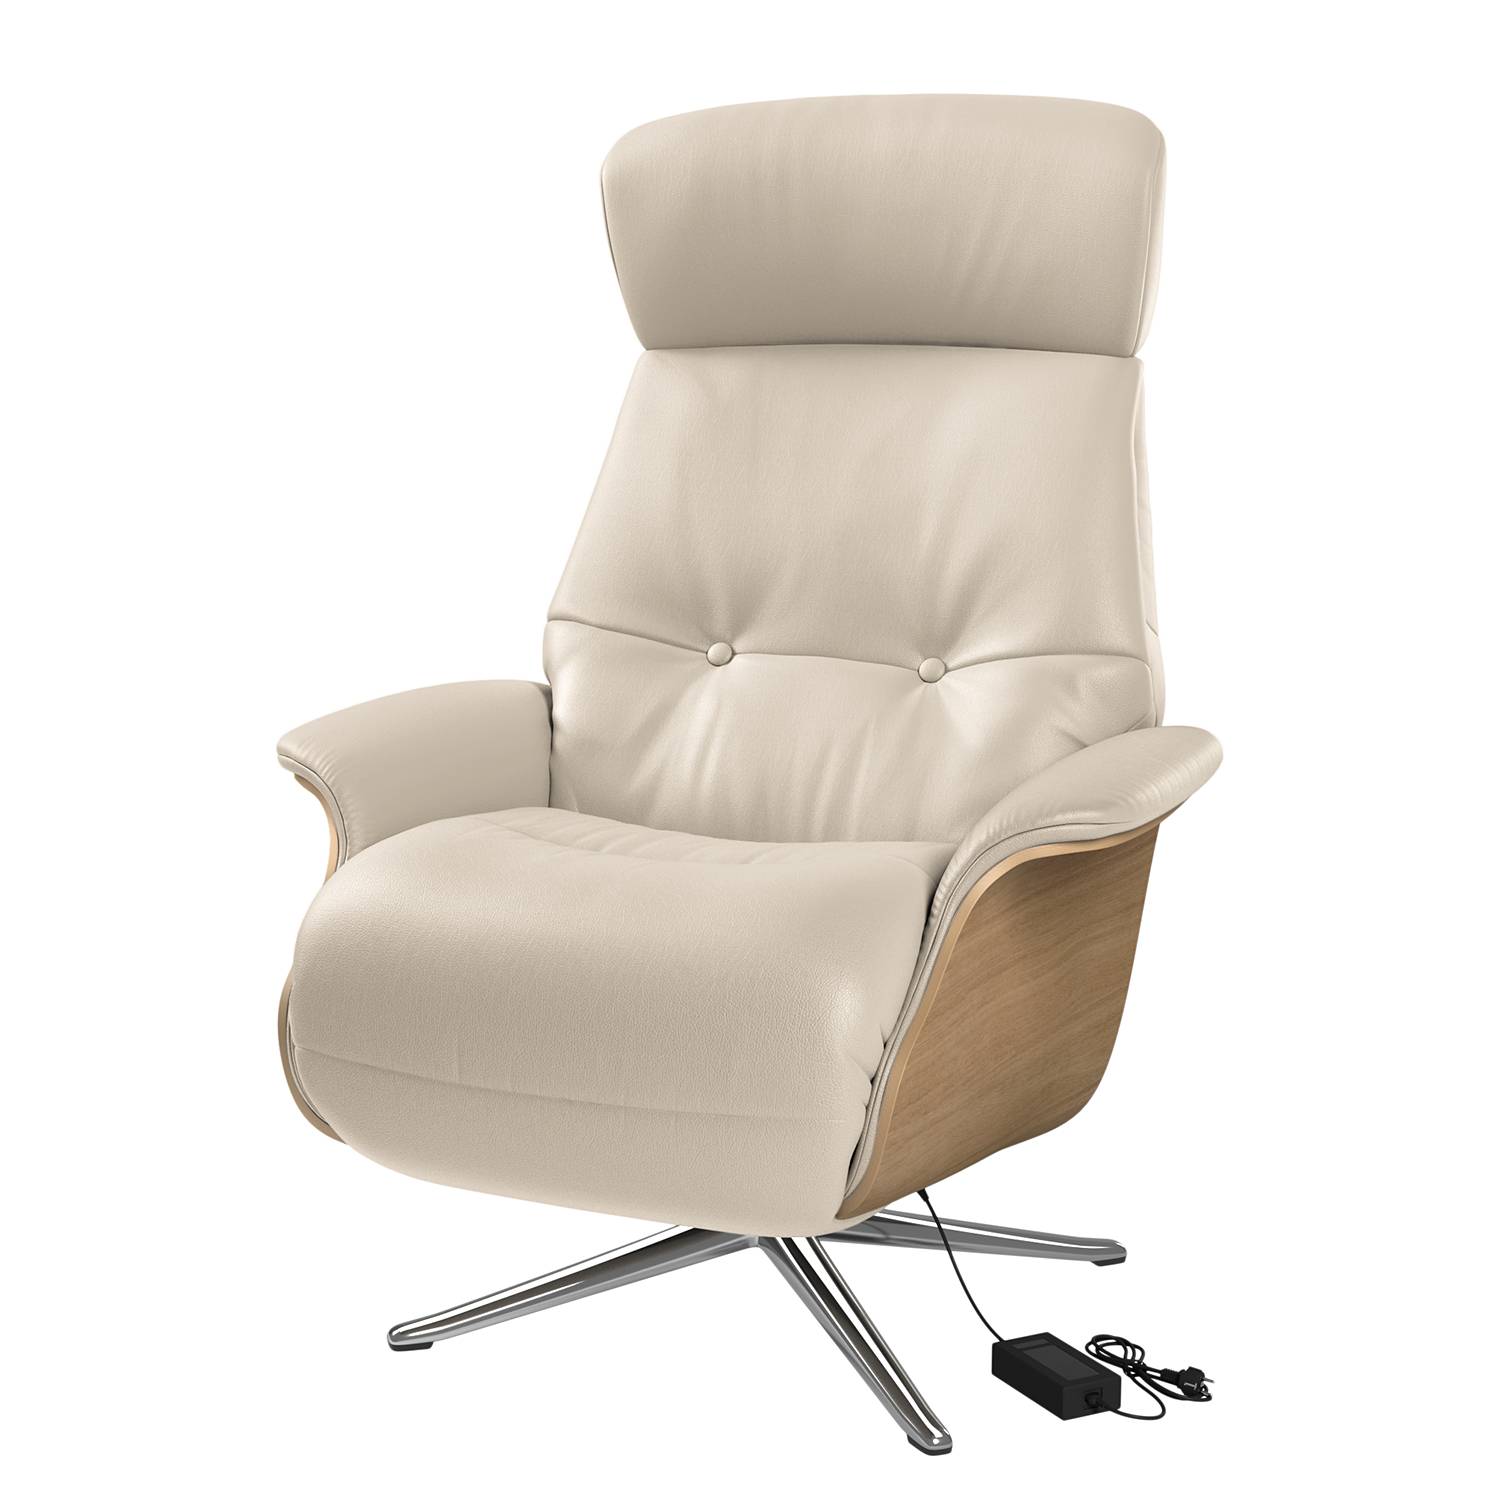 Image of Fauteuil relax Anderson VI 000000001000131421